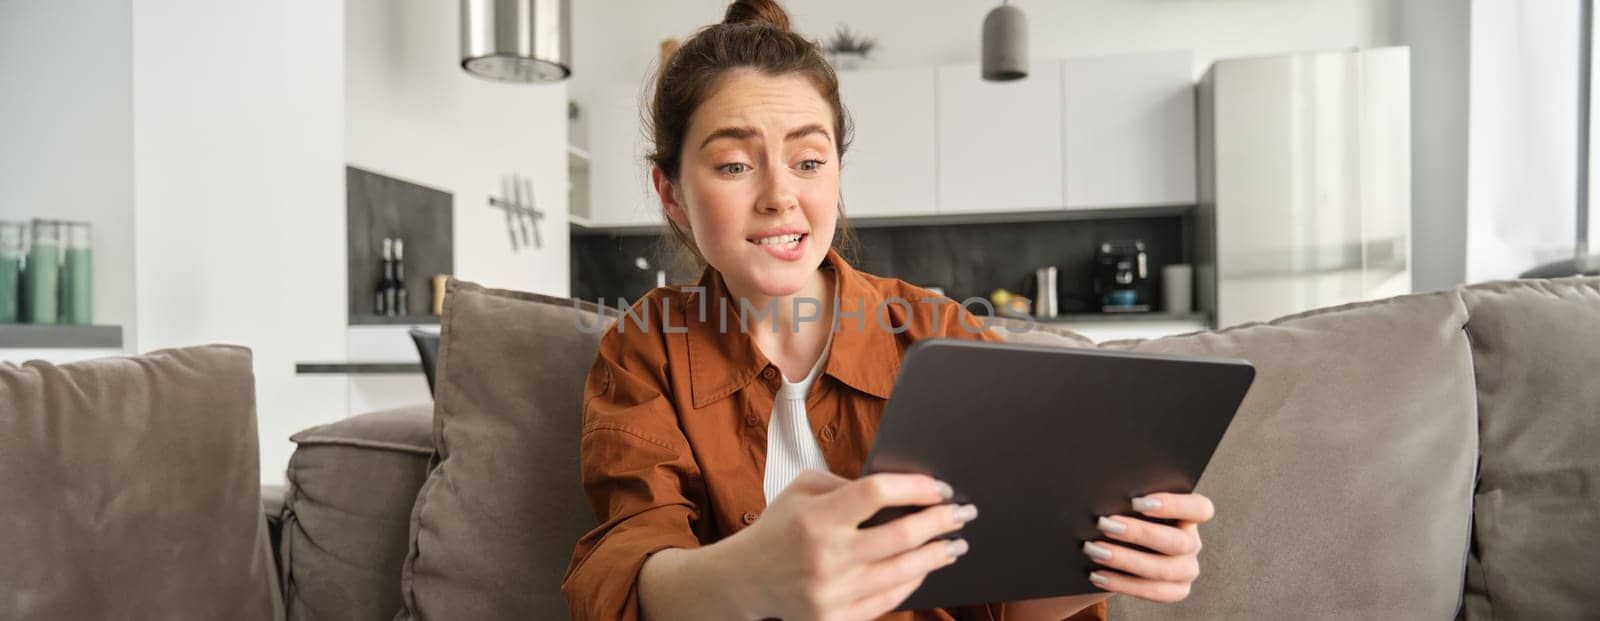 Portrait of young woman looking stressed and tensed at digital tablet, playing difficult level video game, sitting on couch, using gadget, spending time at home.